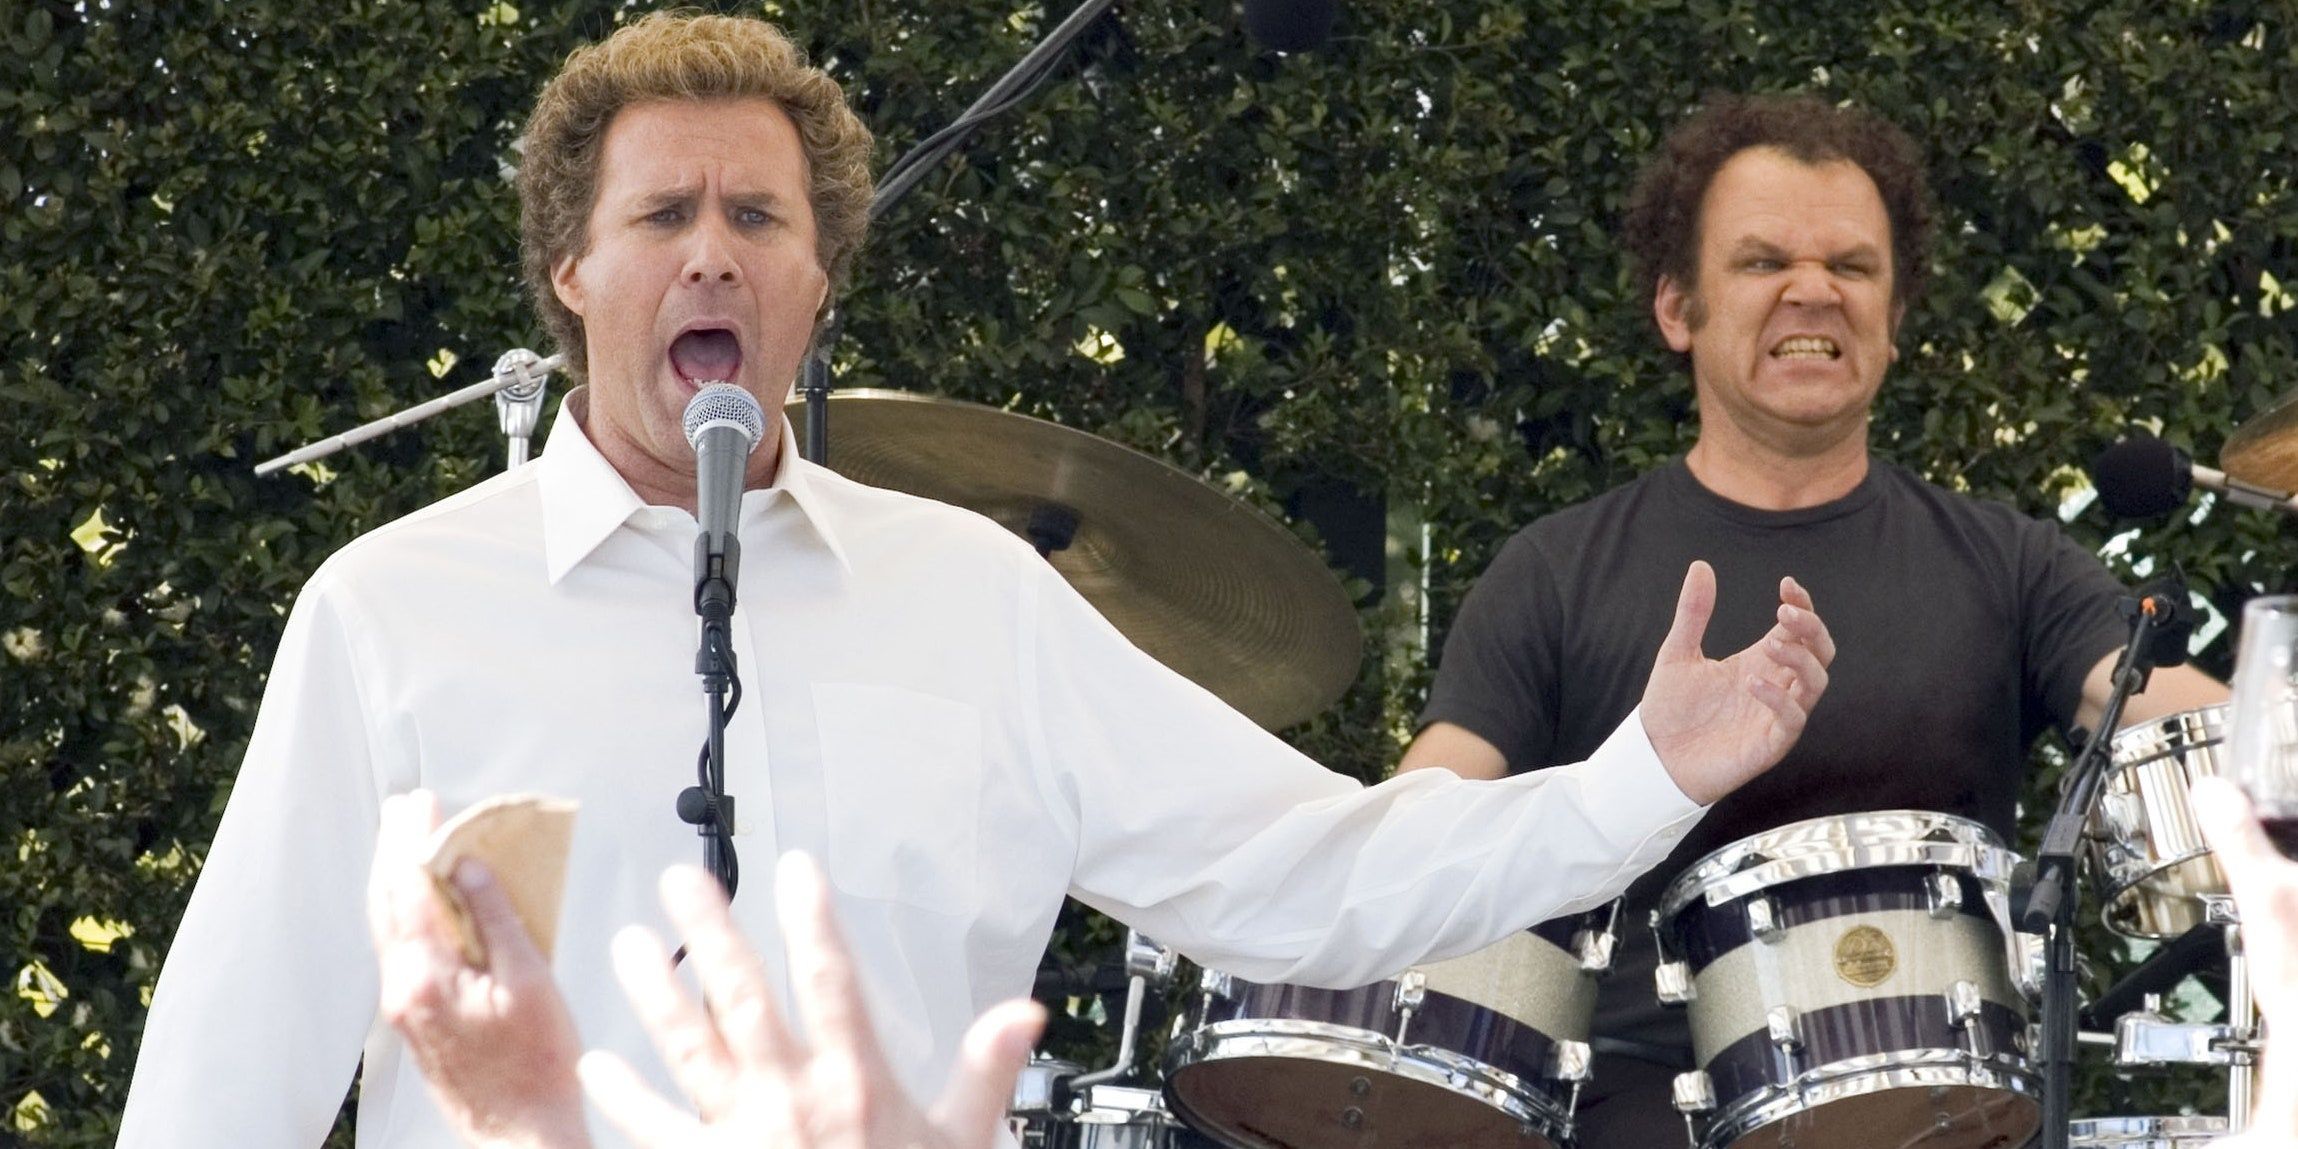 Will Ferrell 10 Memorable Roles Ranked From Most Villainous To Most Heroic